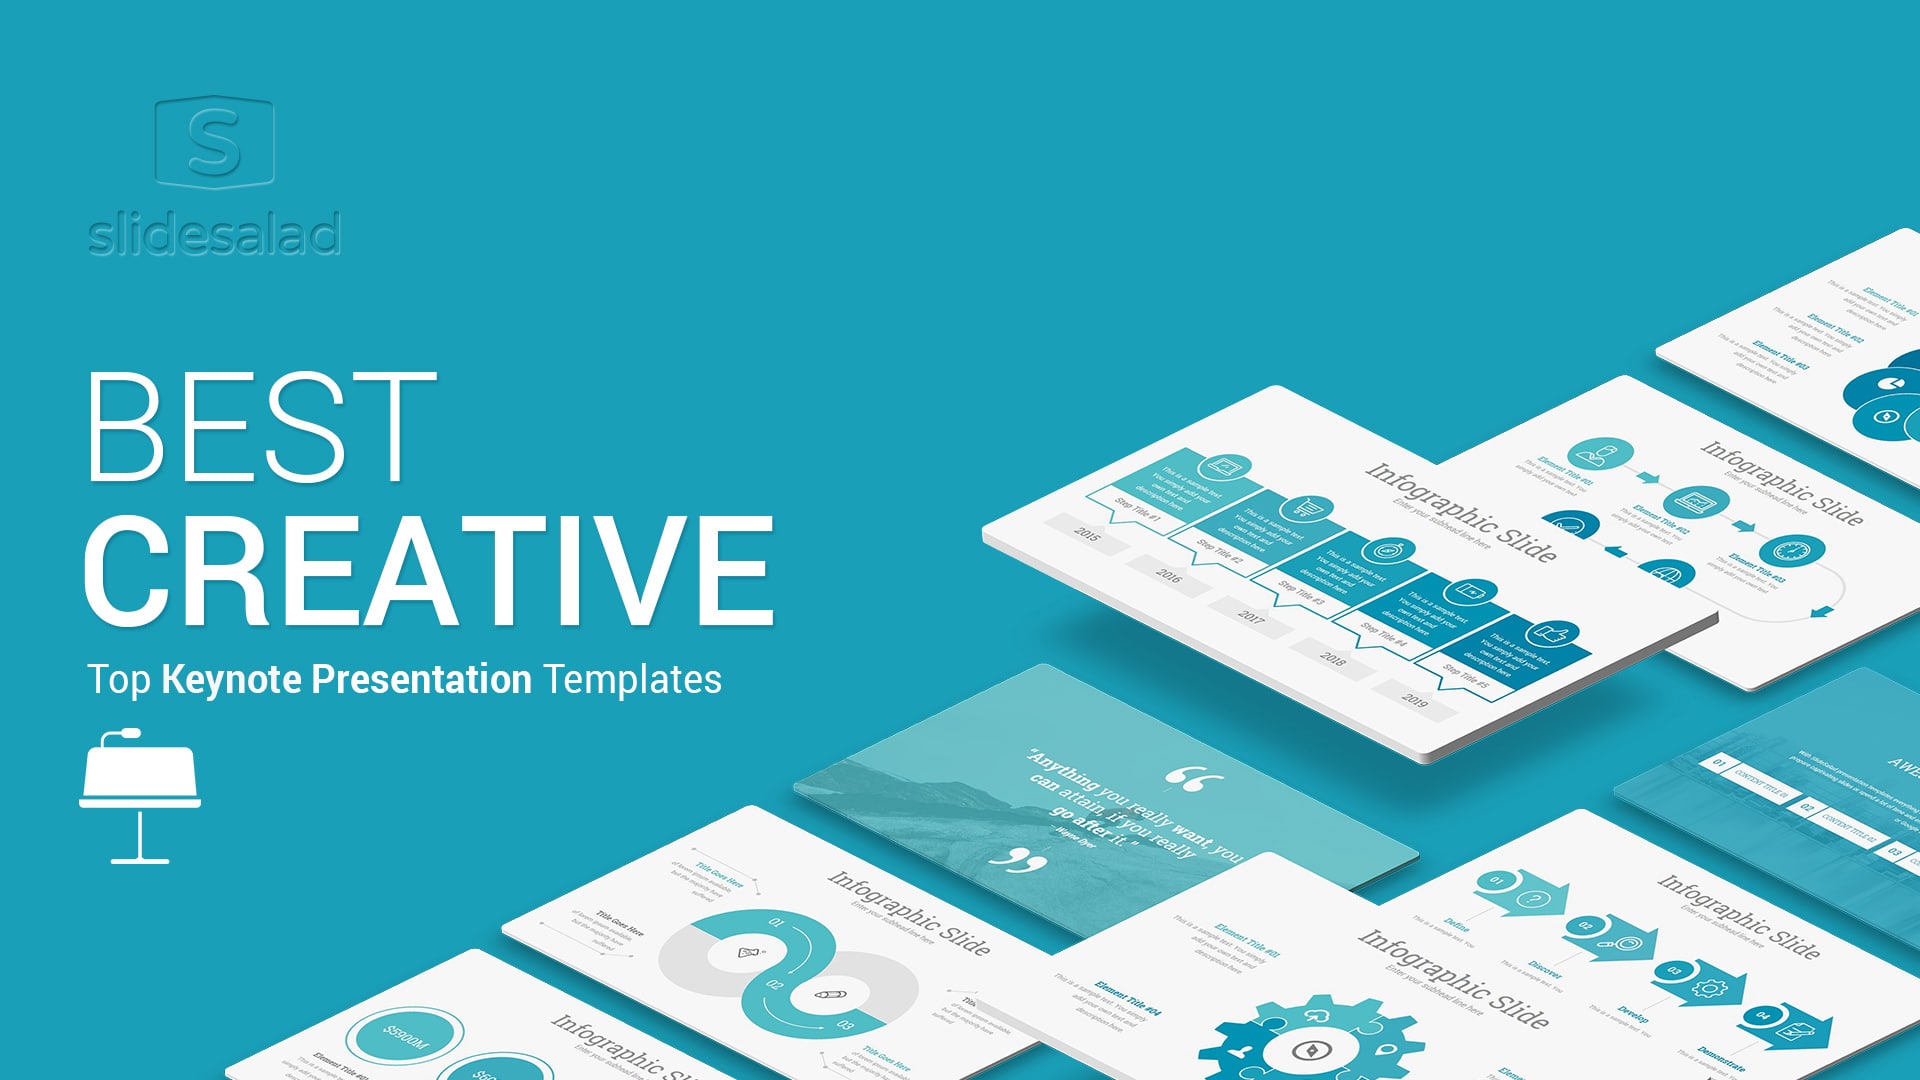 Professional Keynote Templates for Creative Businesses